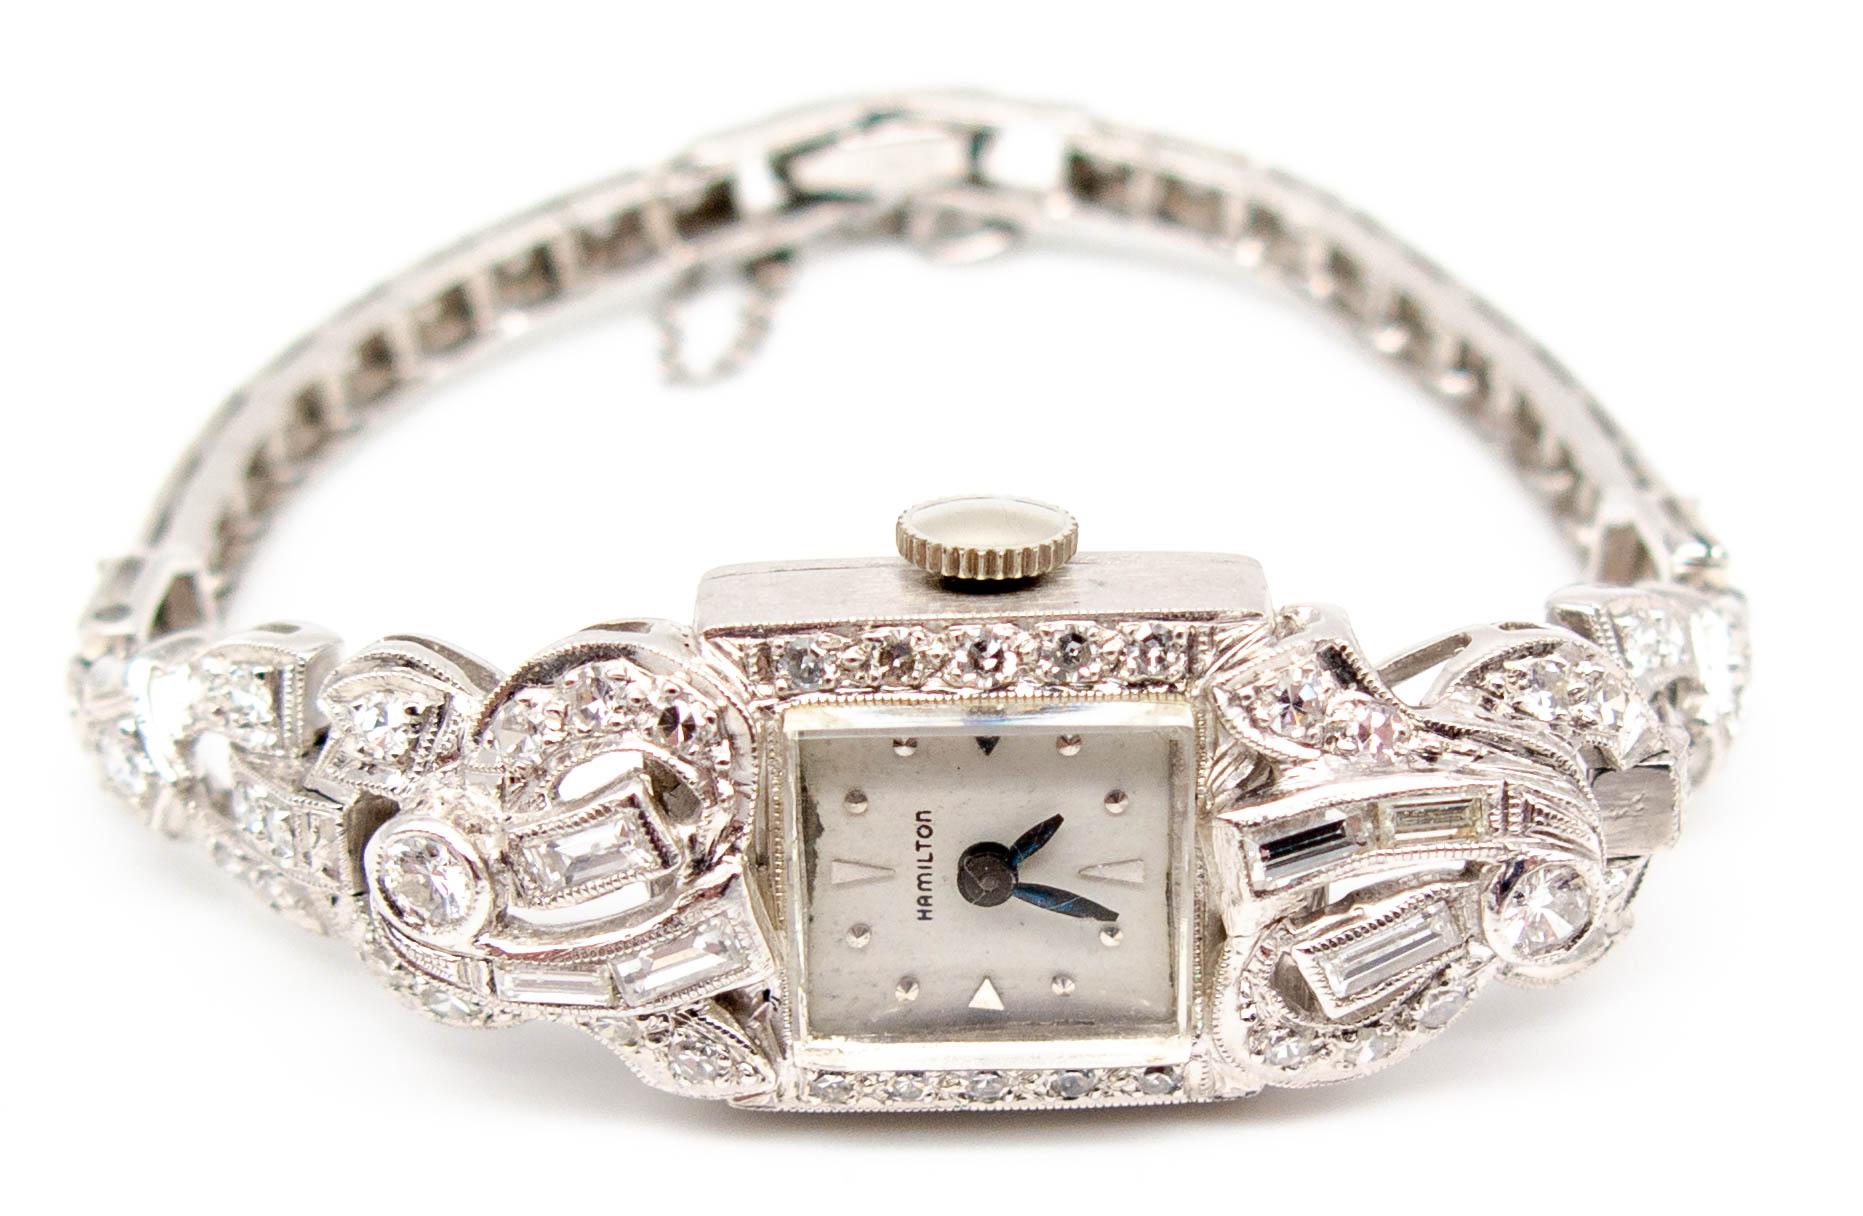 A swirly styled timepiece probably from the 1940's, this Hamilton watch contains a mix of some single cut but mostly modern brilliant cut diamonds totaling about 3 carats.  The watch measures a petite 6 inches in length, is stamped 14 K and has a